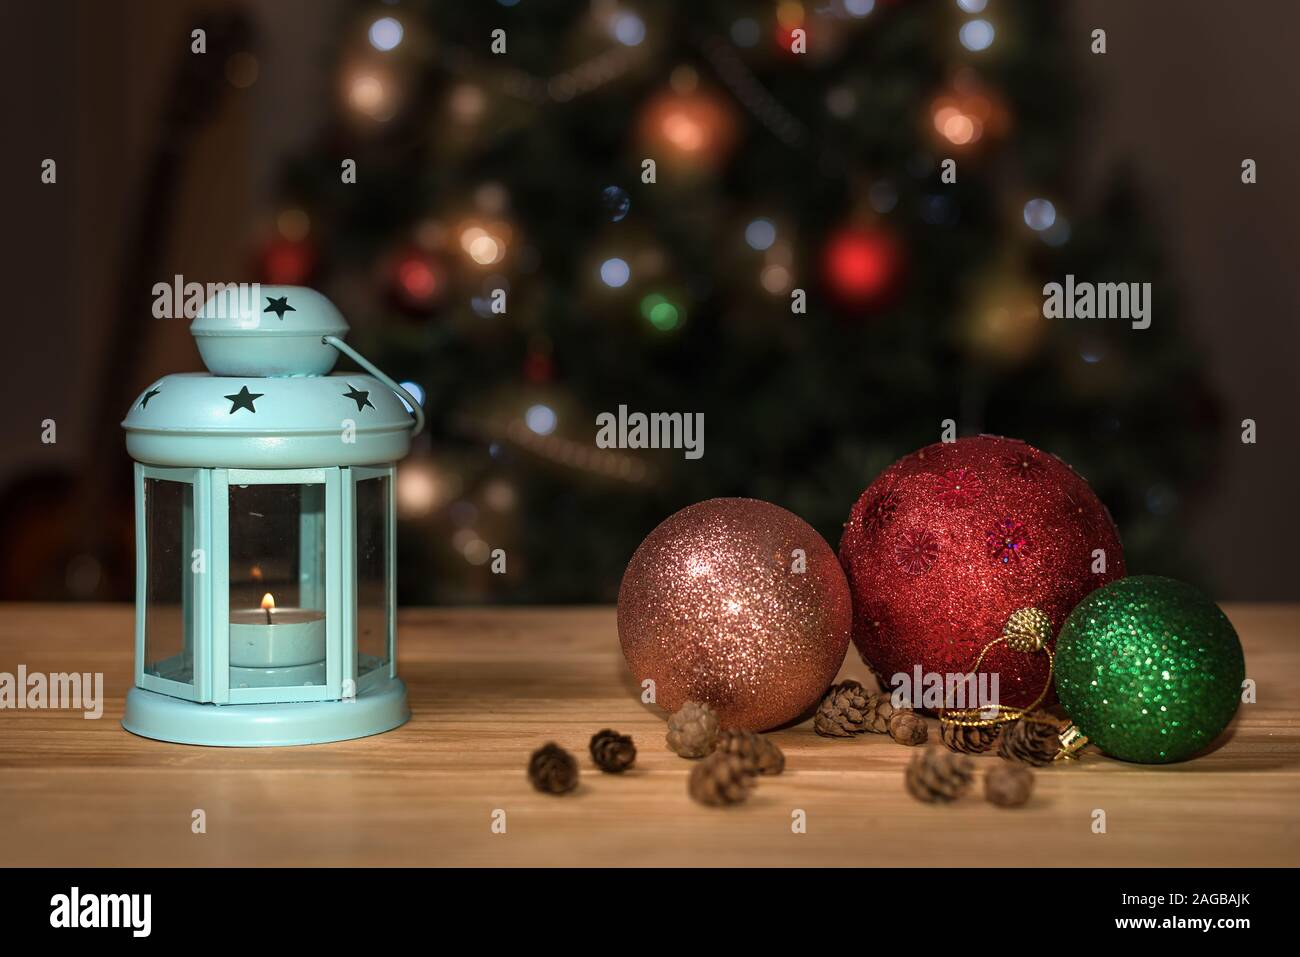 Holiday Christmas decoration. Festive decoration with lantern, pine cones, Christmas tree and ornaments on a wooden table Stock Photo